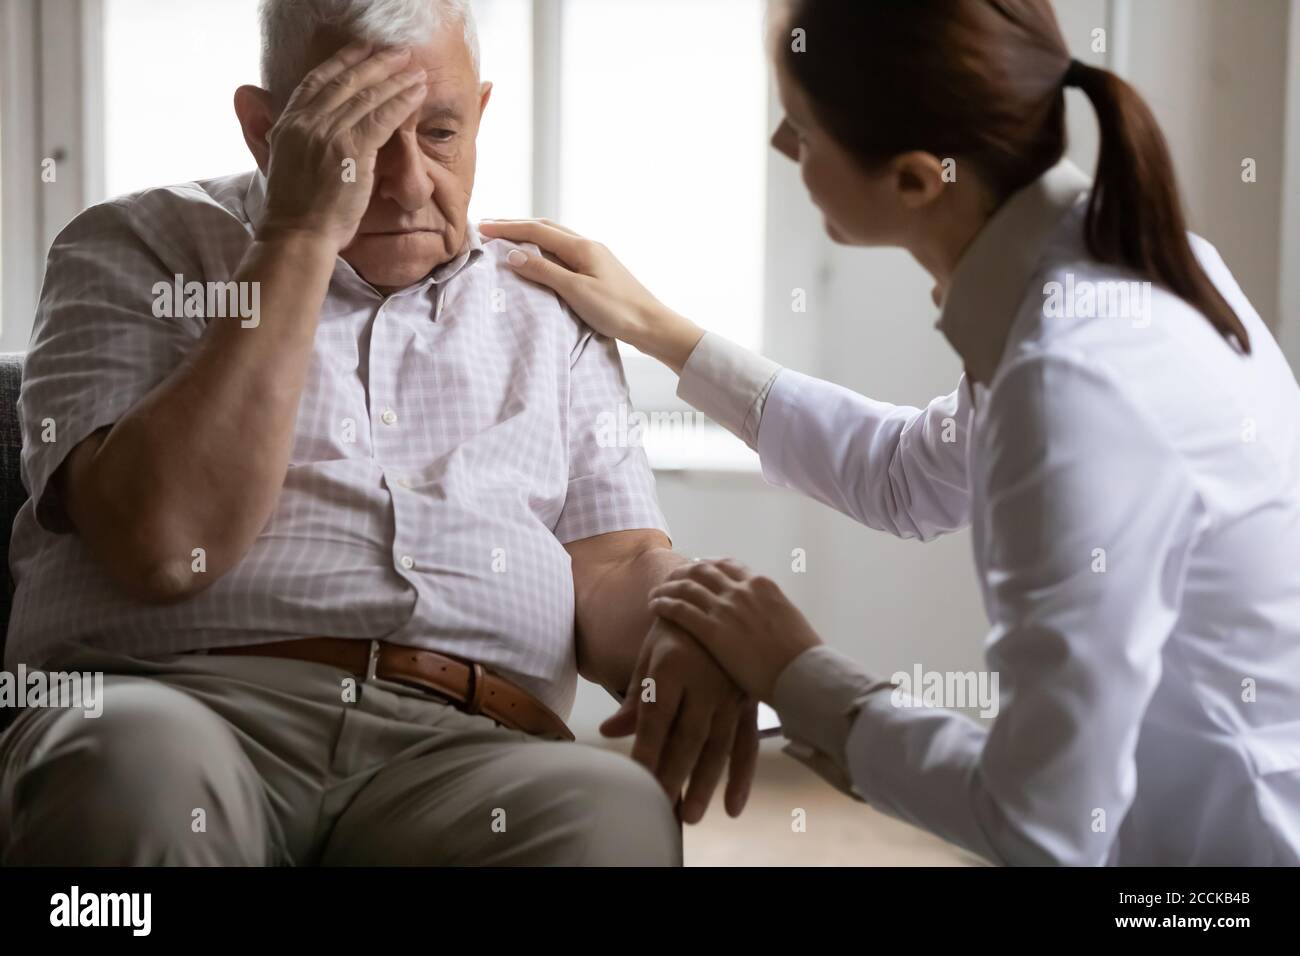 Unhealthy mature old patient complaining about head ache. Stock Photo